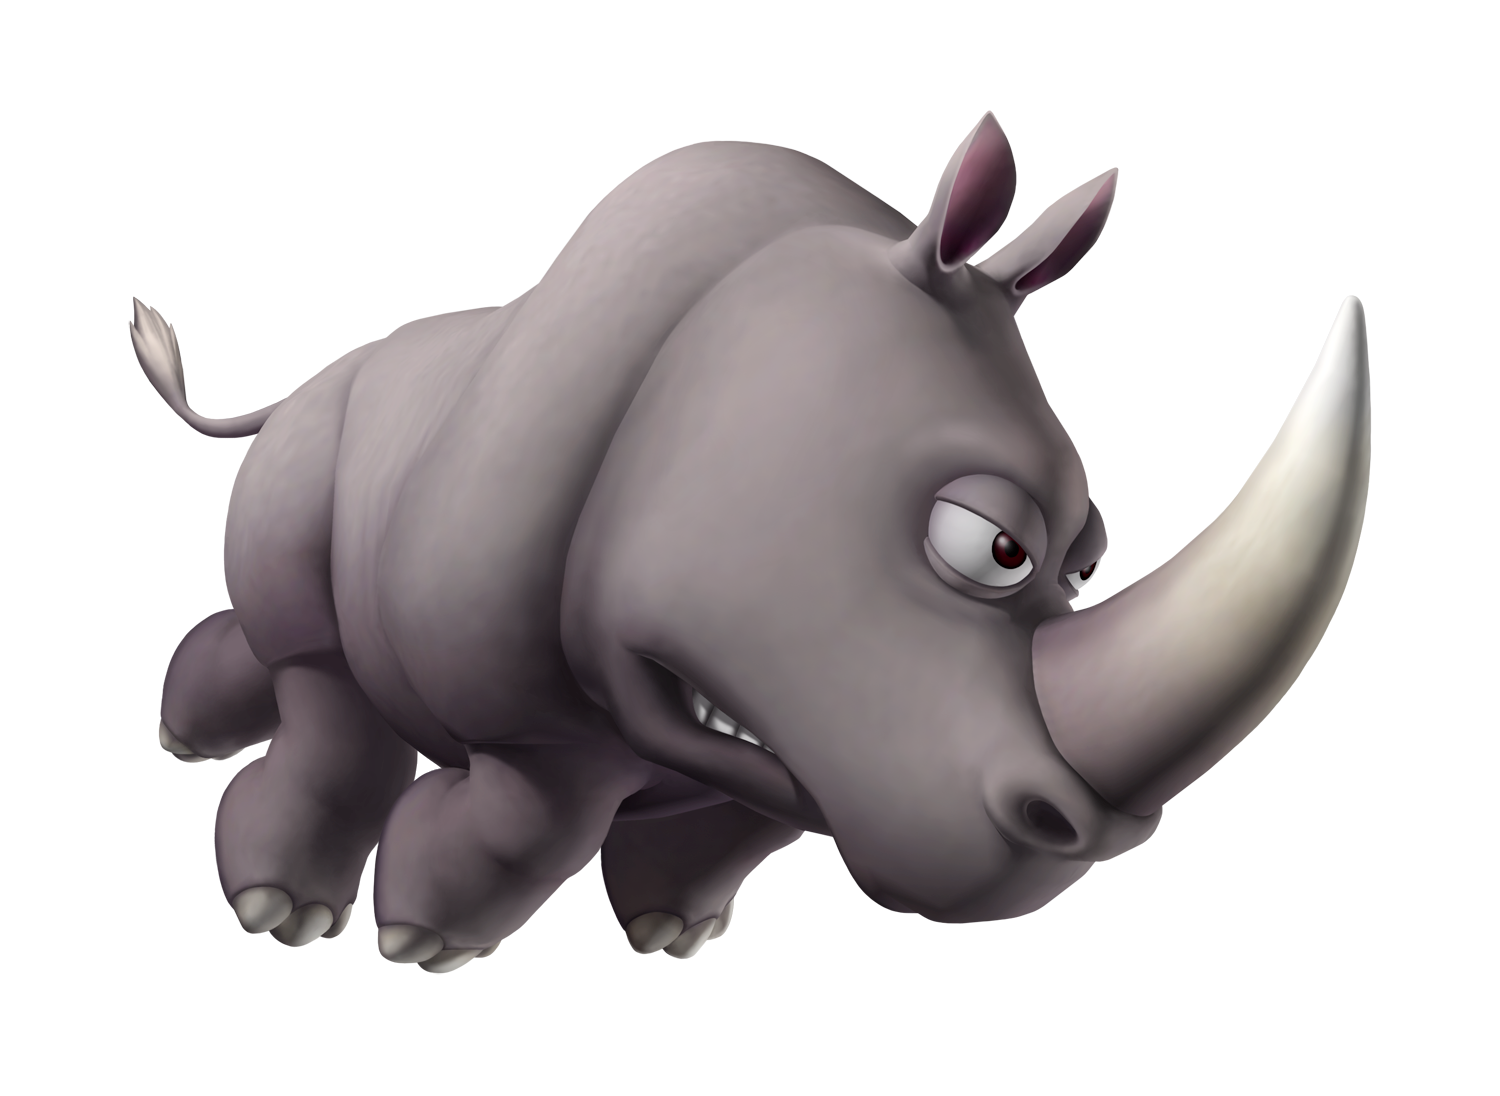 Rhino PNG images